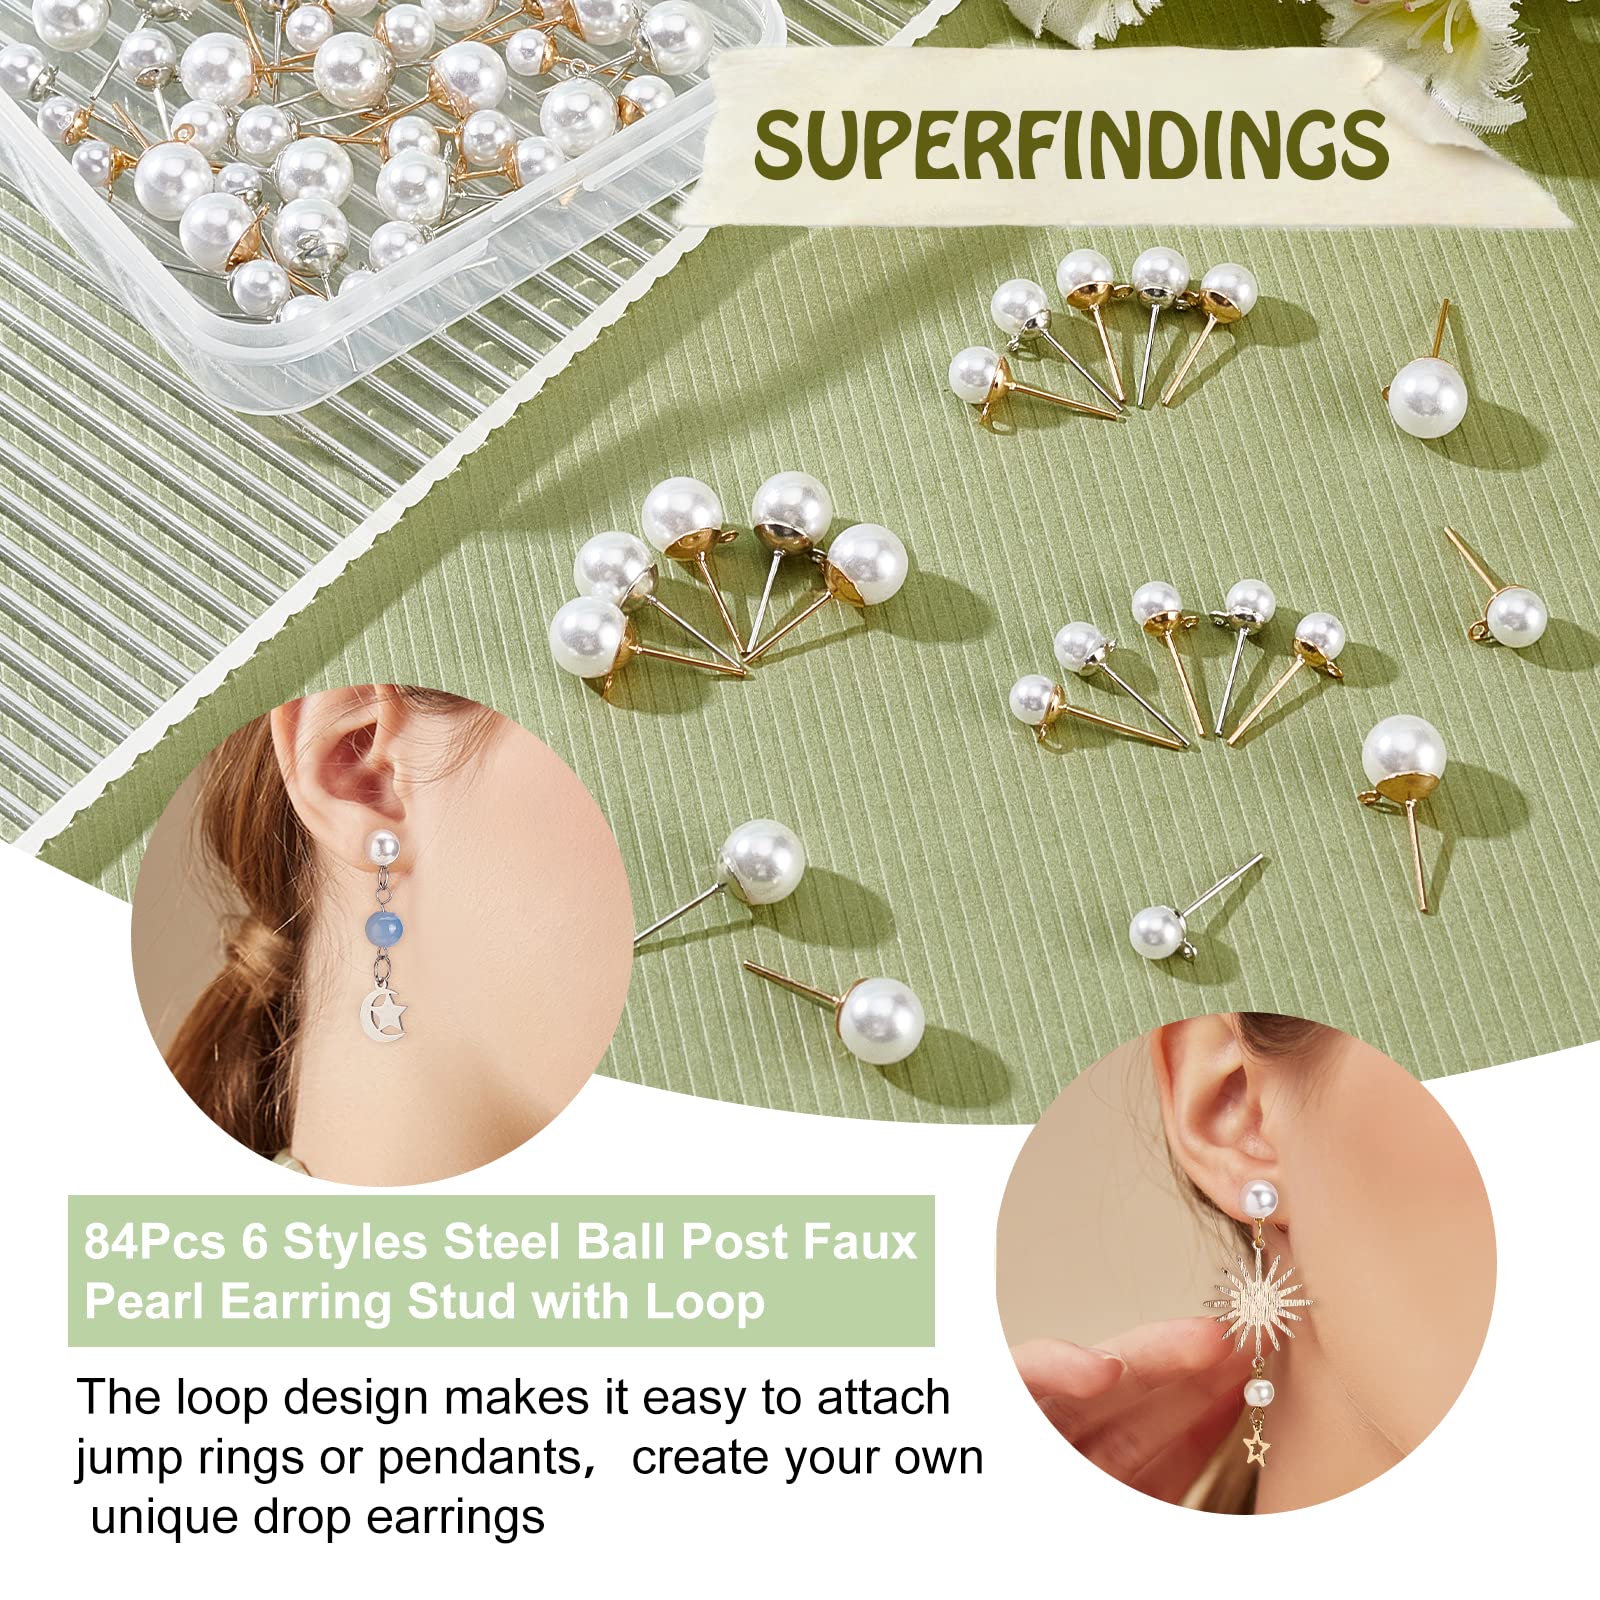 SUPERFINDINGS 84Pcs 3 Sizes Earring Posts with Loops Faux Pearl Posts Stud Earrings Acrylic Imitation Pearl Beads Ball Stud Earrings for DIY Earring Jewelry Making,Pin:0.8mm